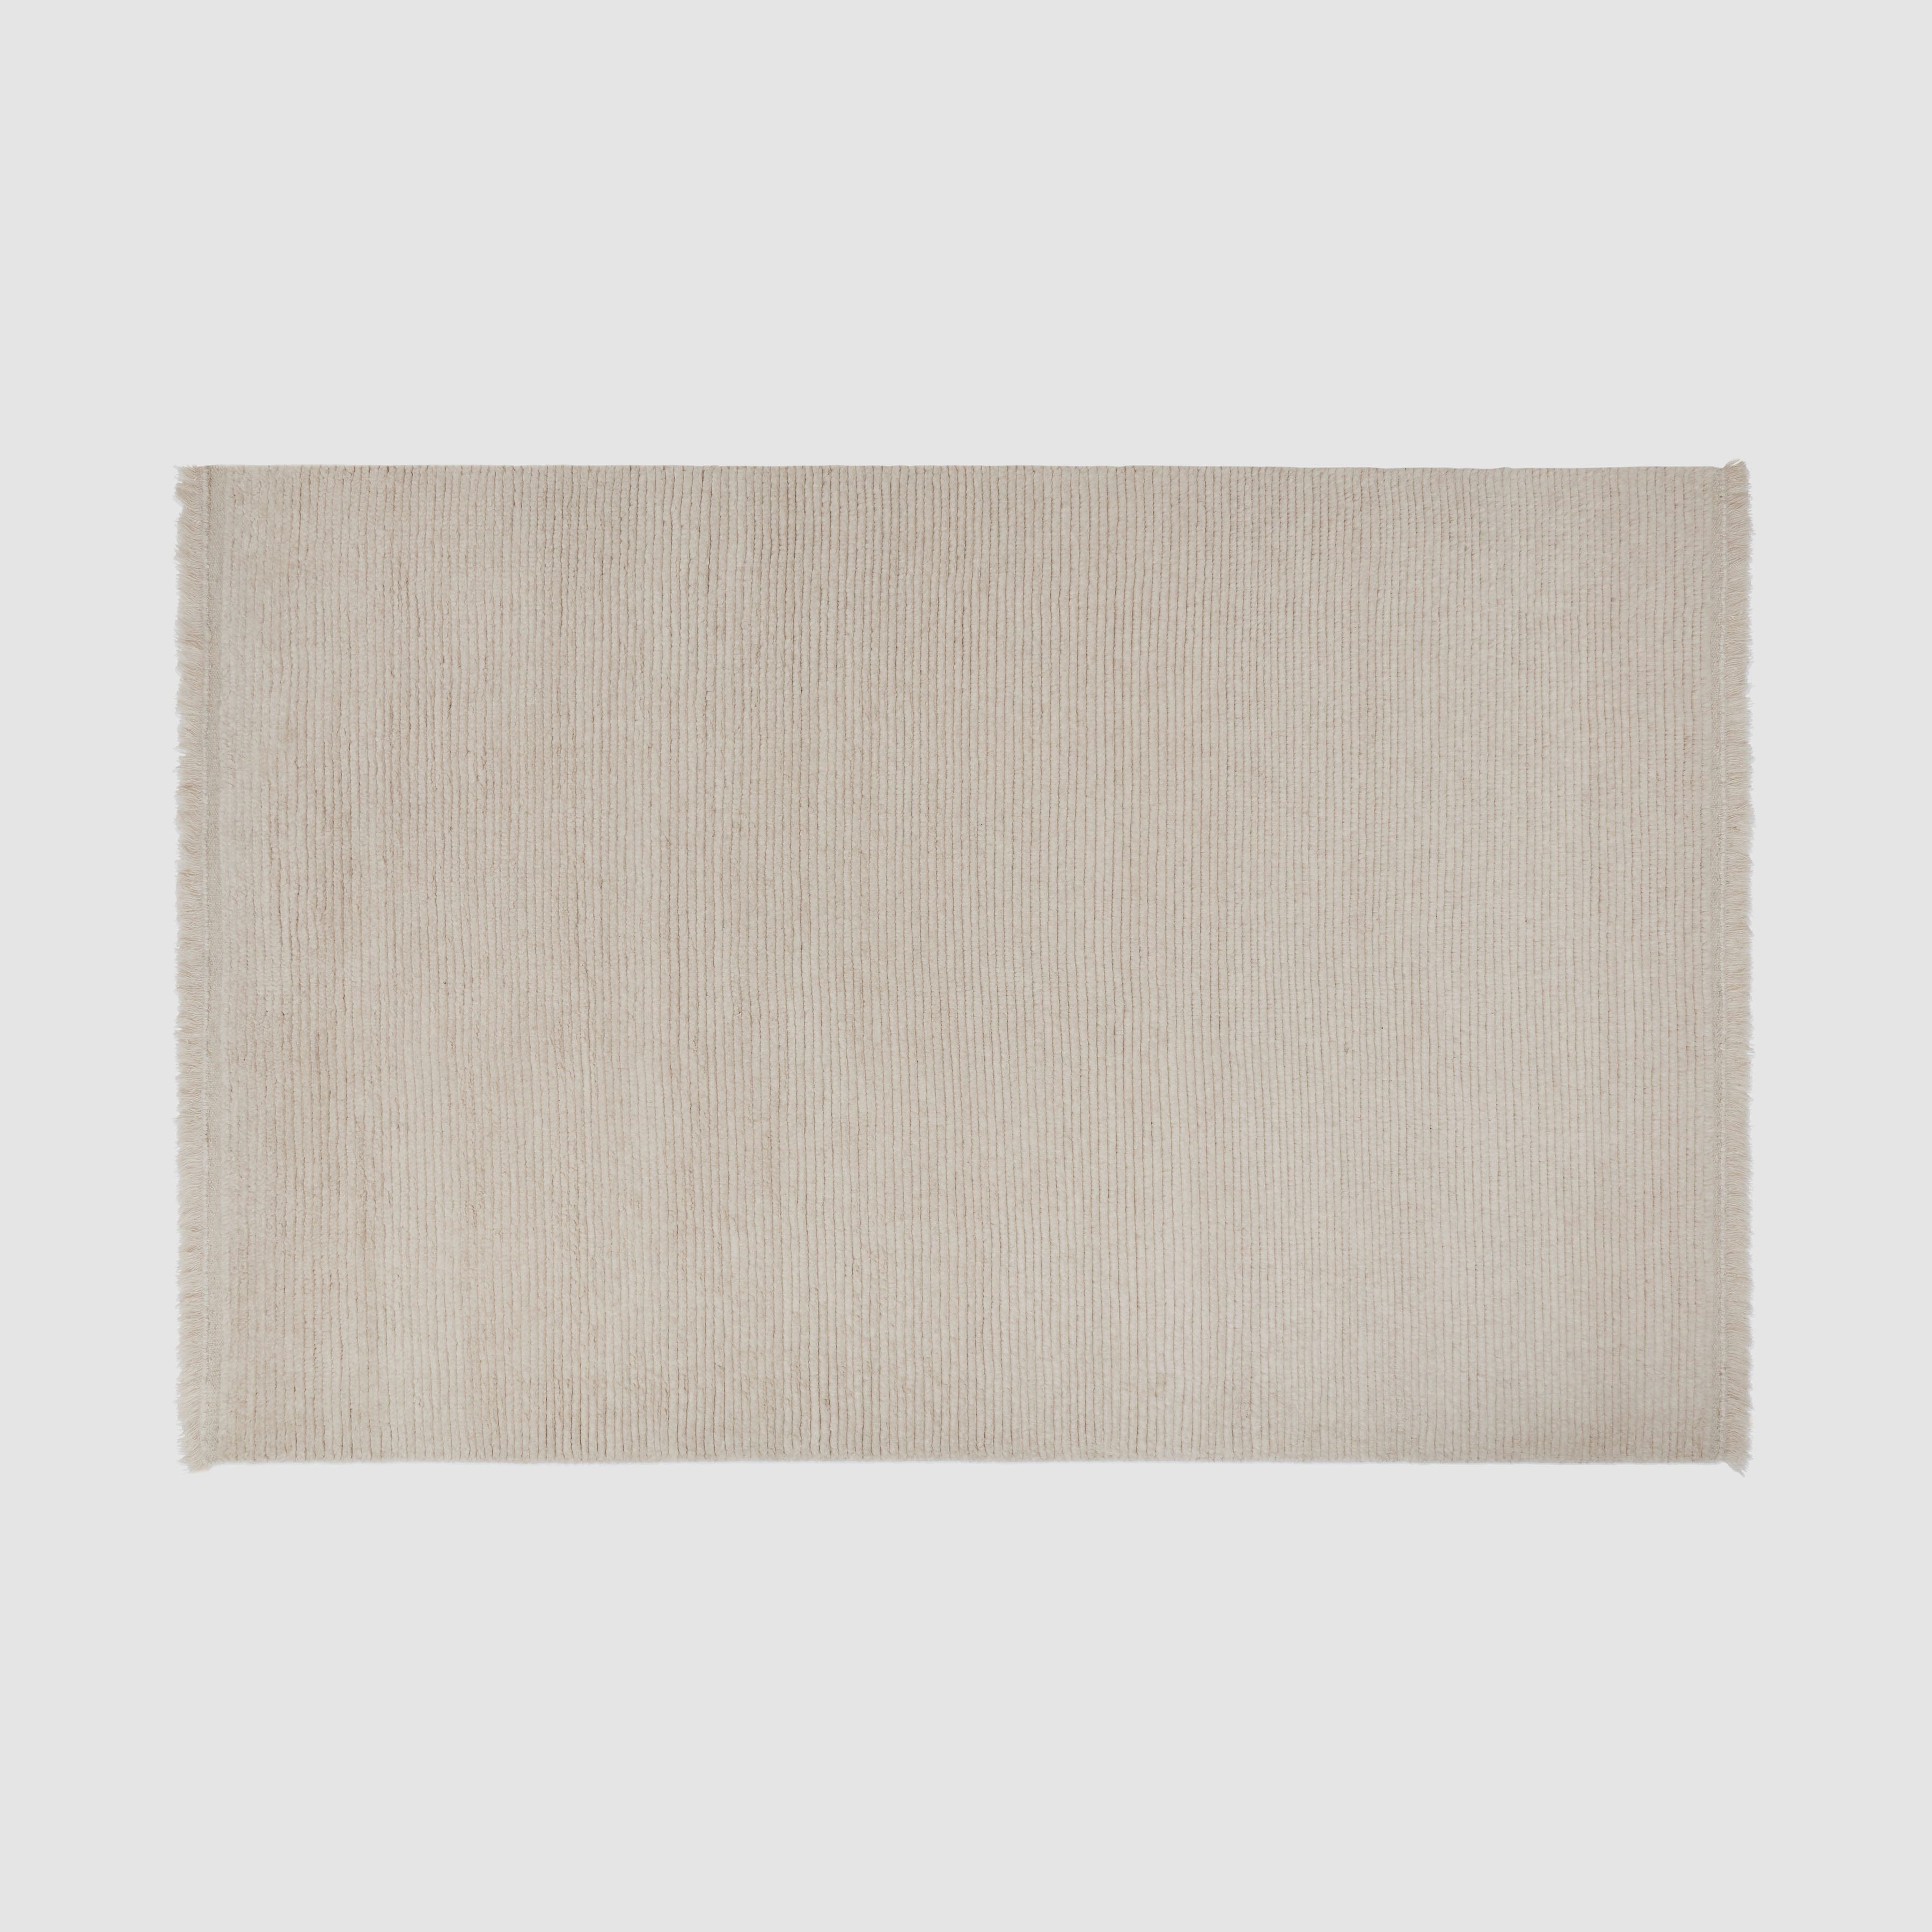 The Citizenry Lata Hand-Knotted Area Rug | 6' x 9' | Browns Tans - Image 6